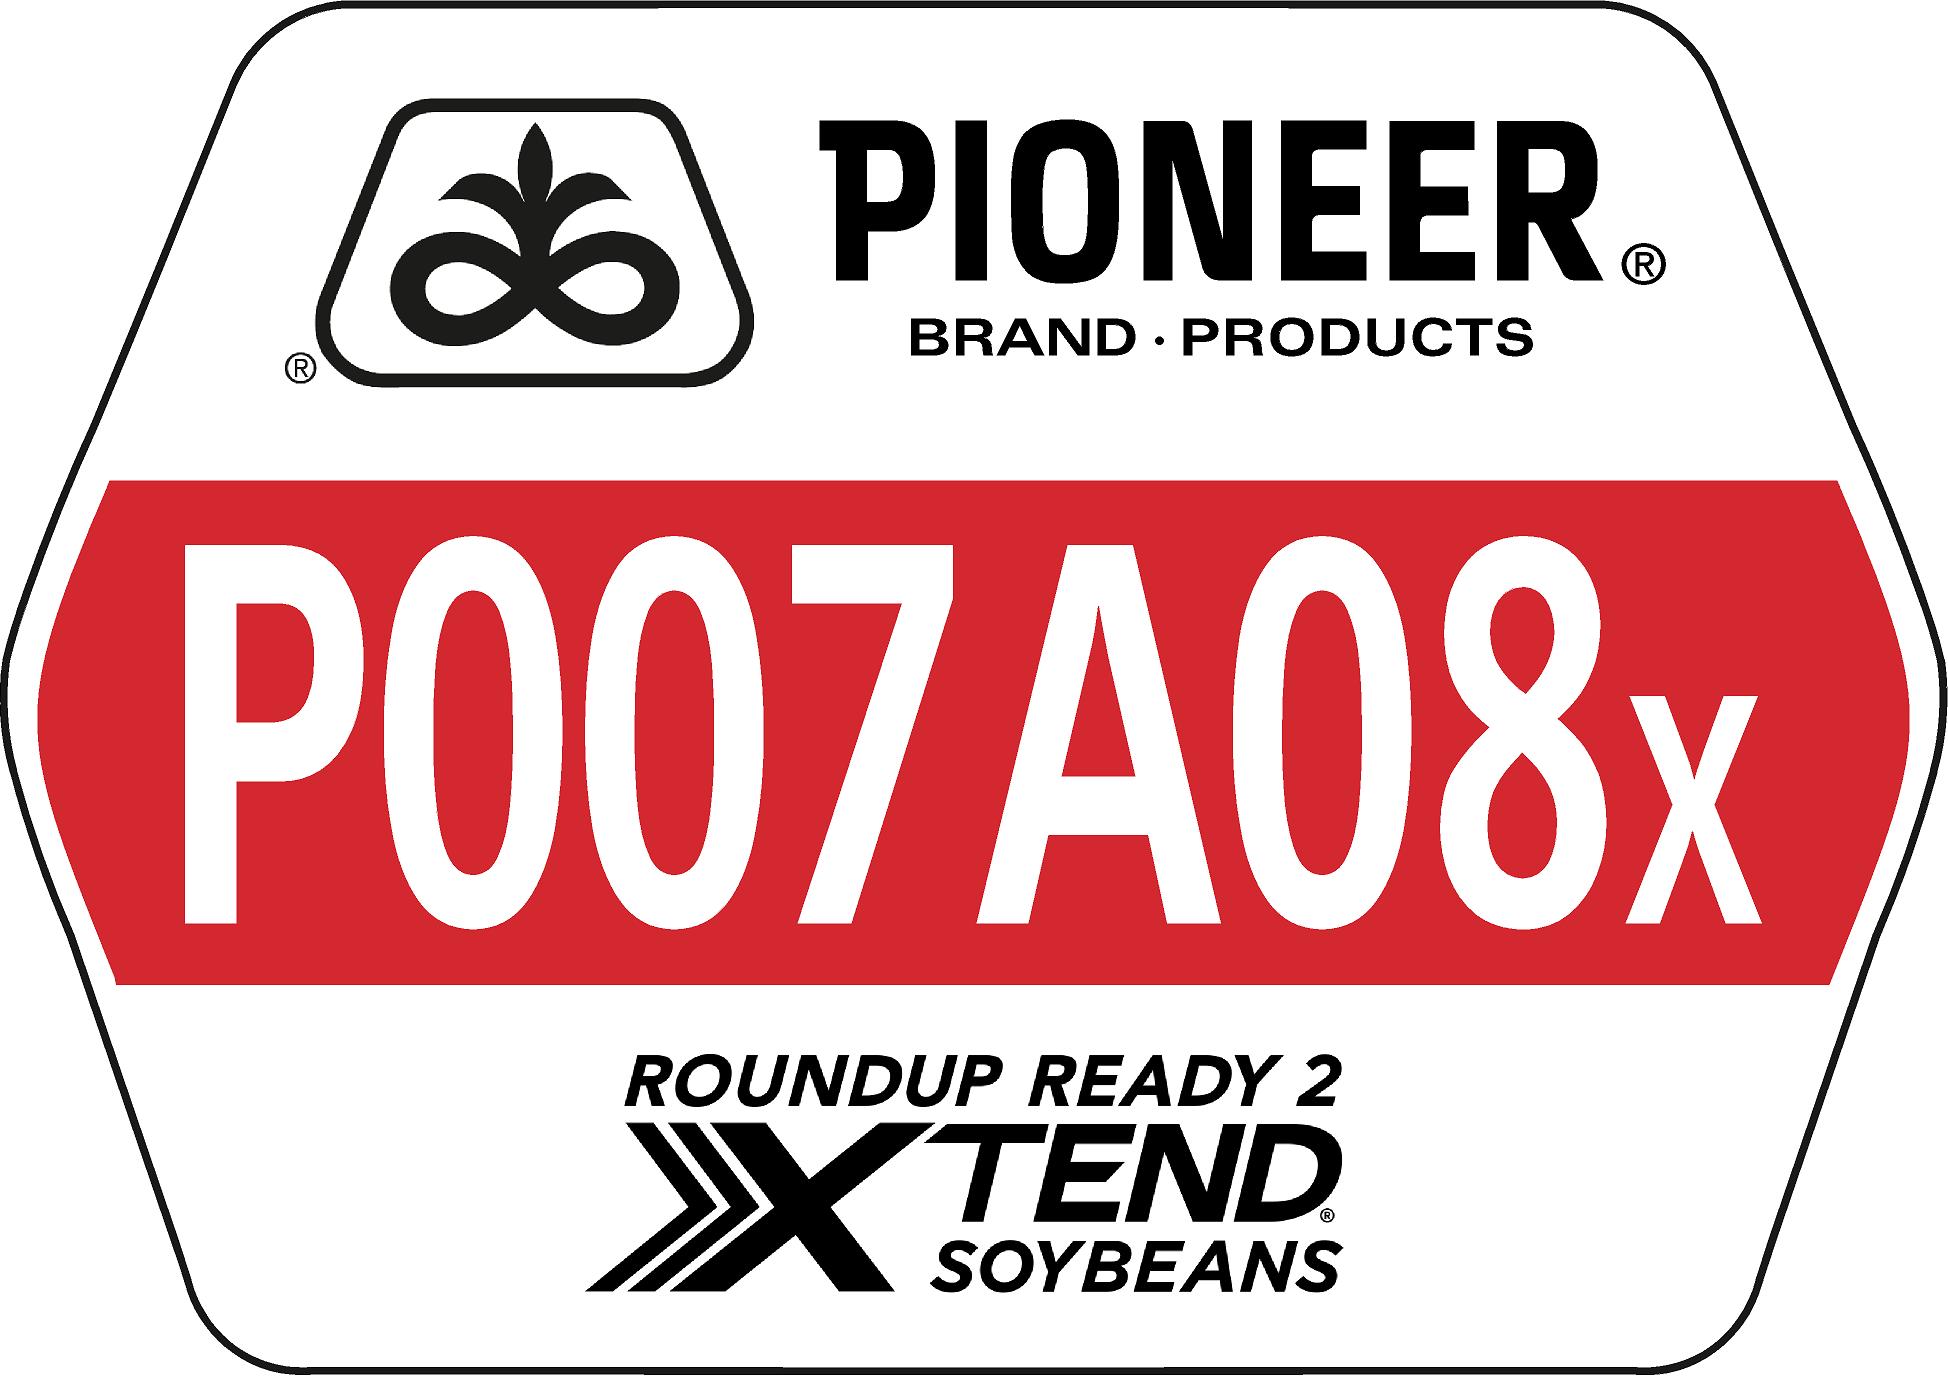 Field Sign > Soybeans > P007A08X